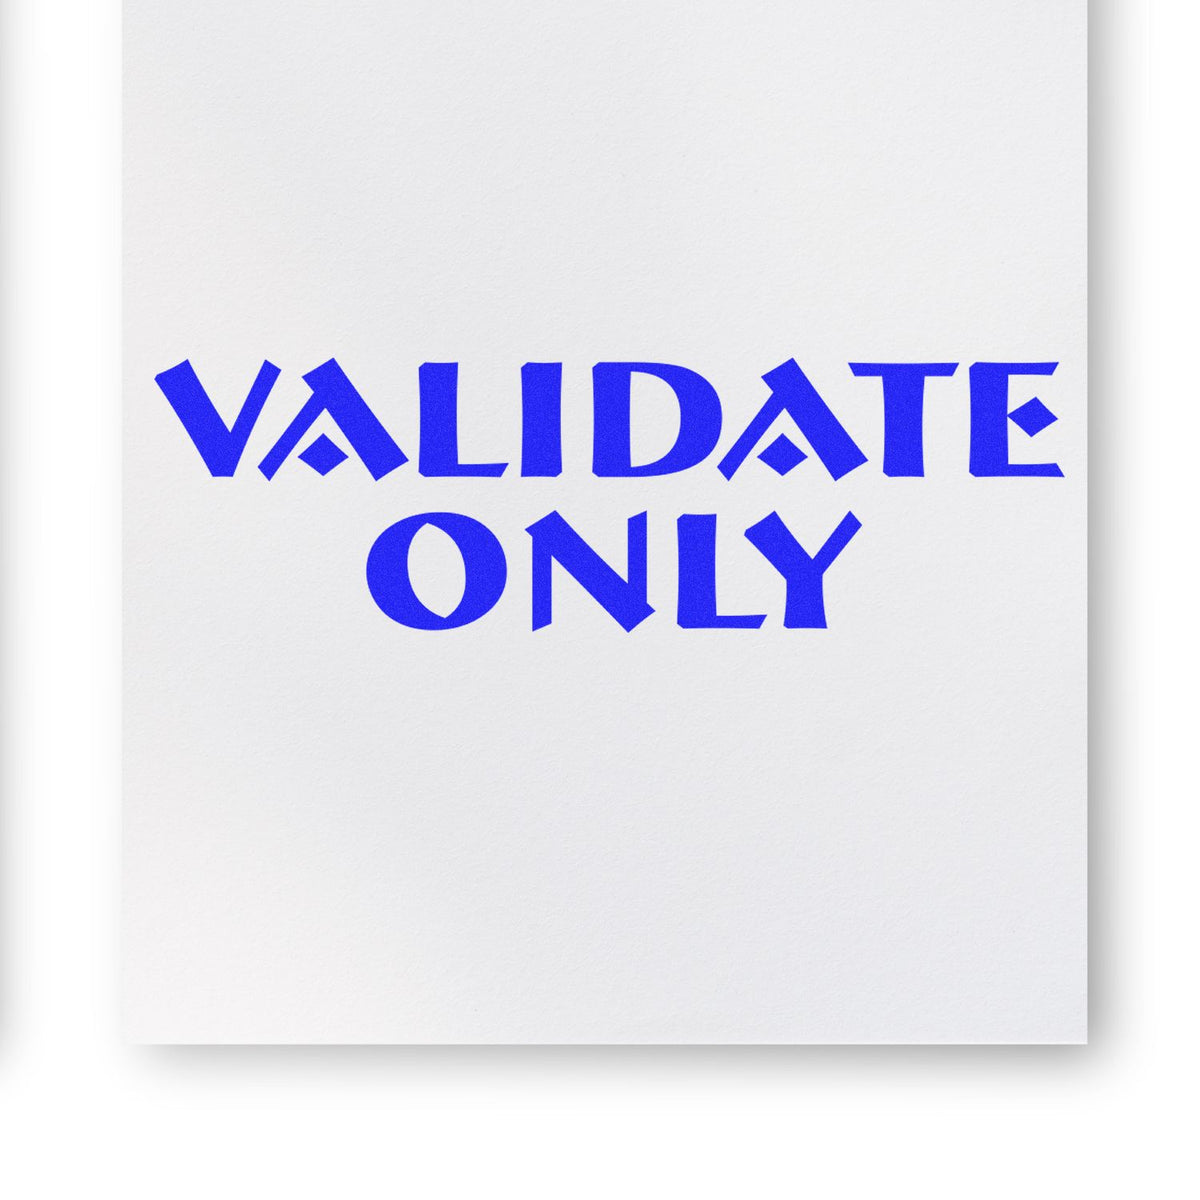 Validate Only Rubber Stamp In Use Photo